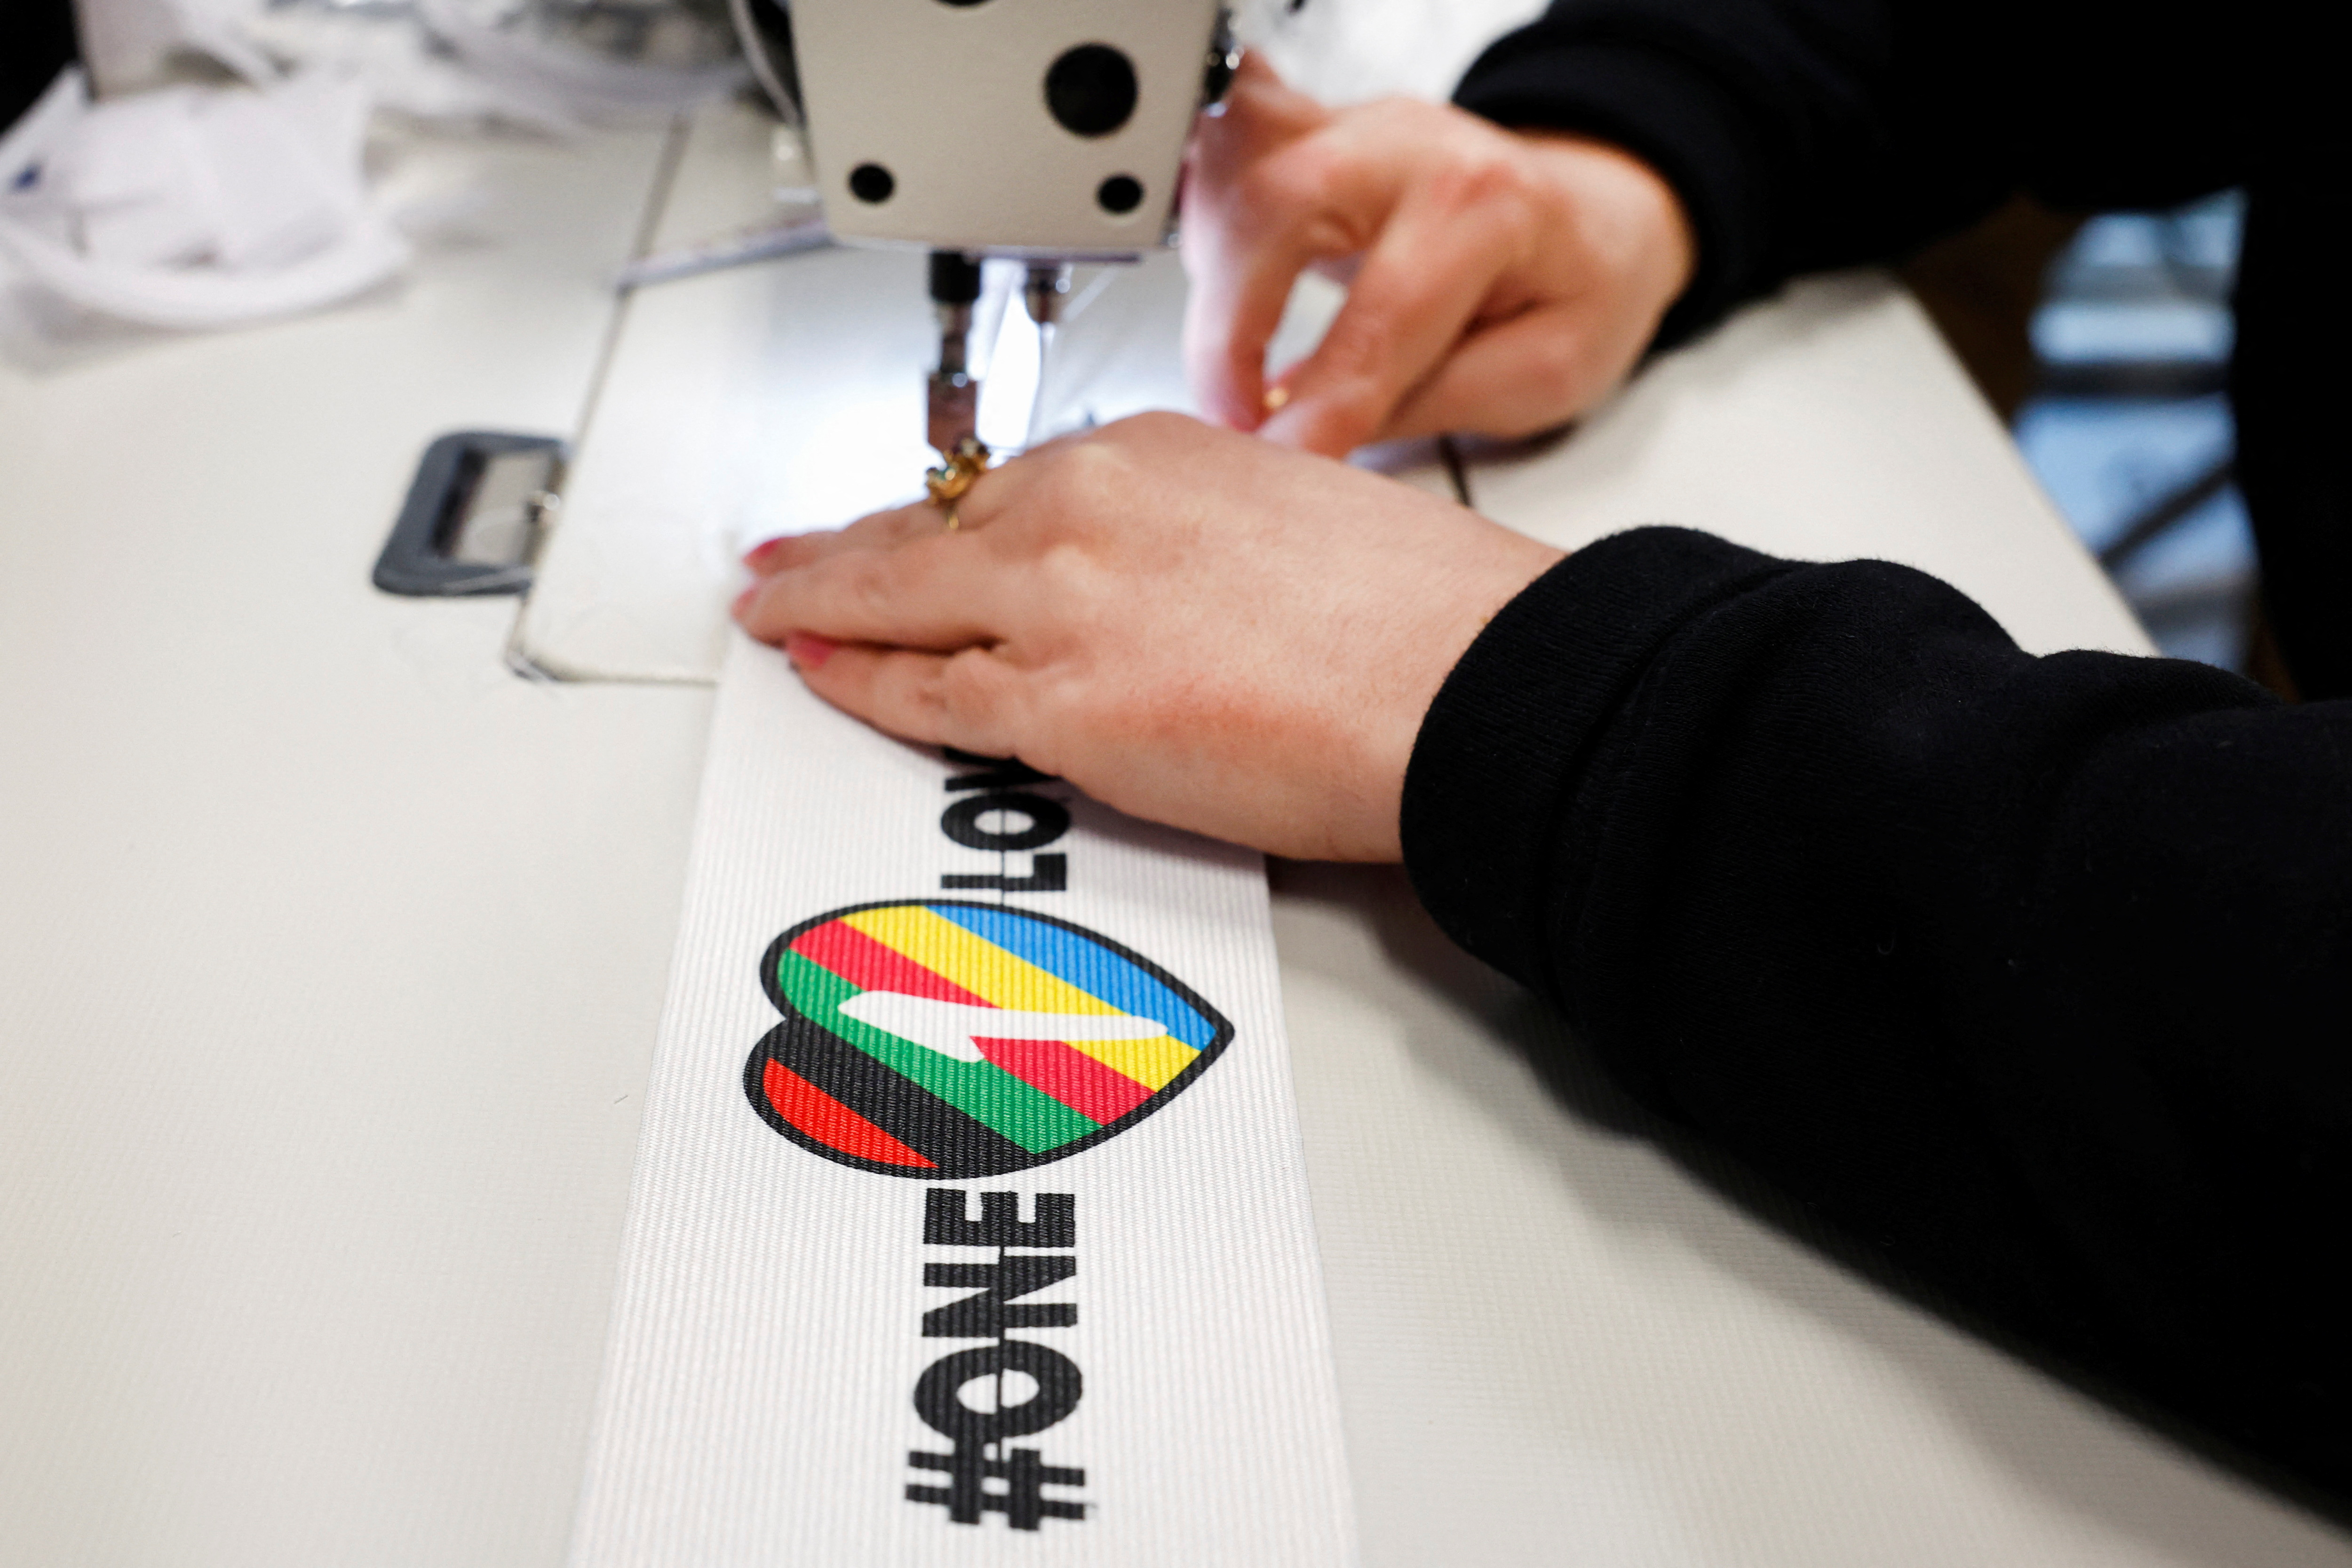 One Love armbands banned by FIFA at the World Cup Qatar 2022